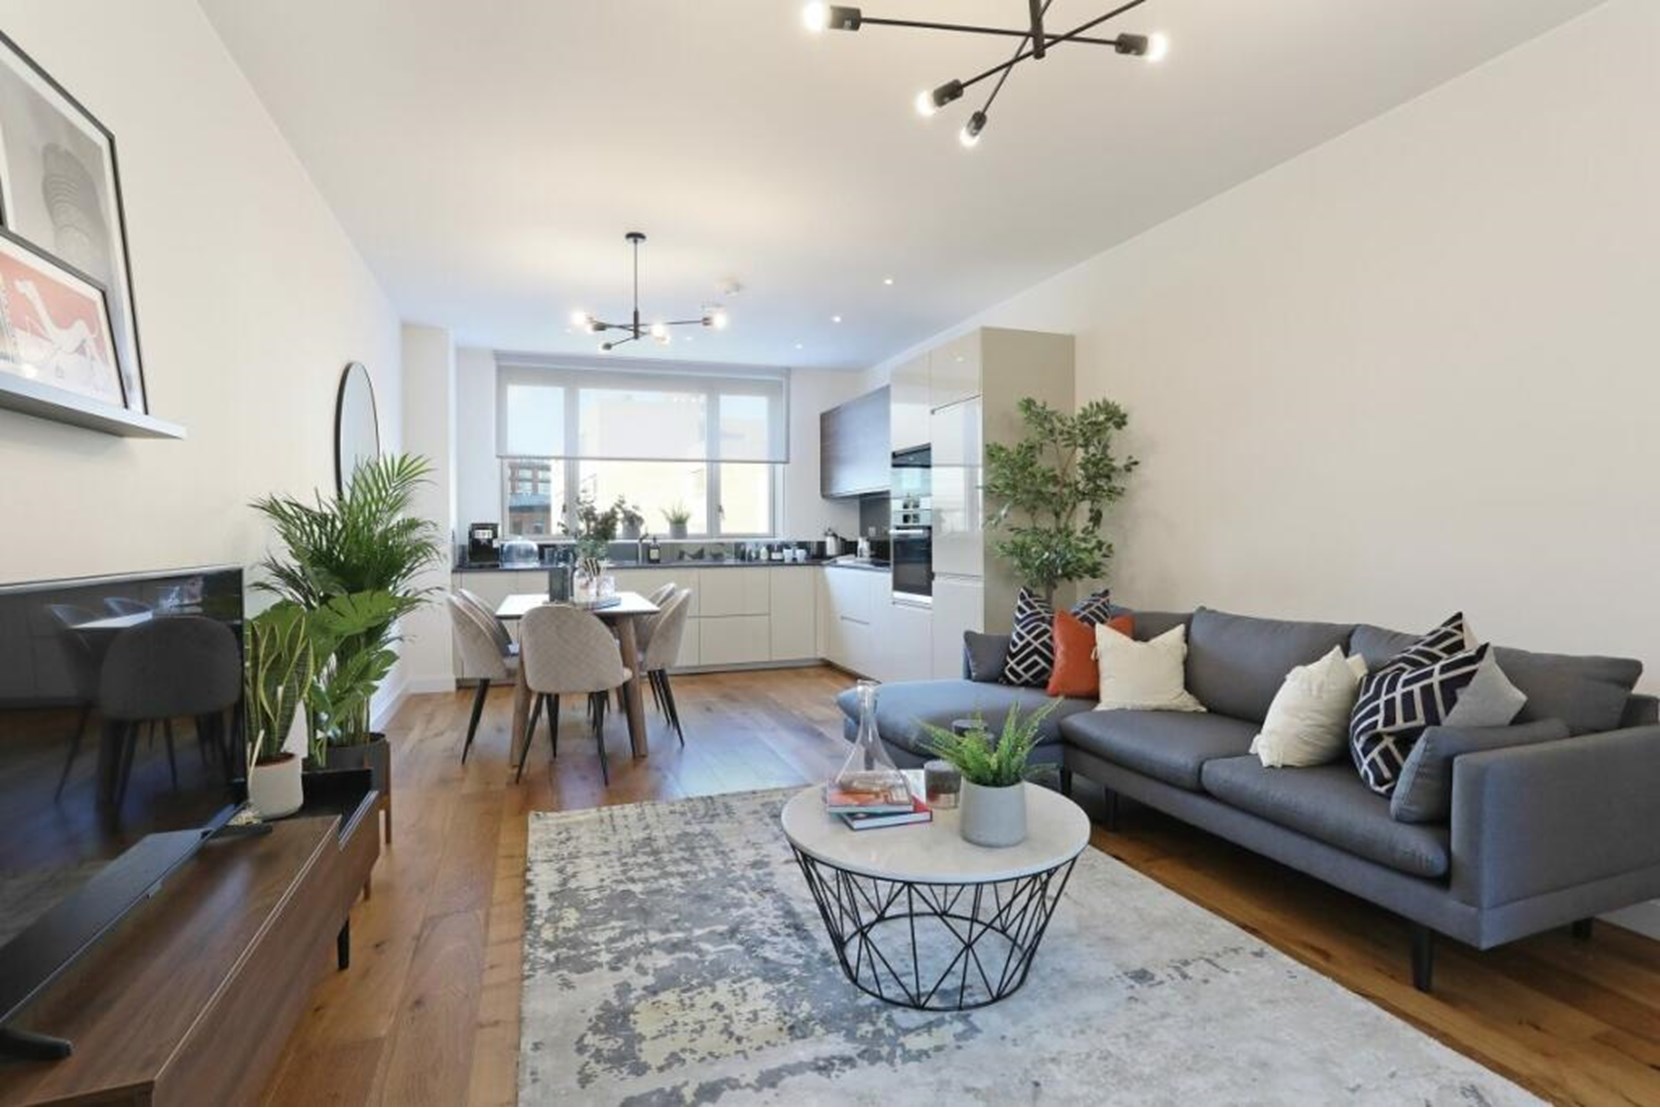 Houses and Apartments to Rent by JLL at Sugar House Island, Newham, E15, living area